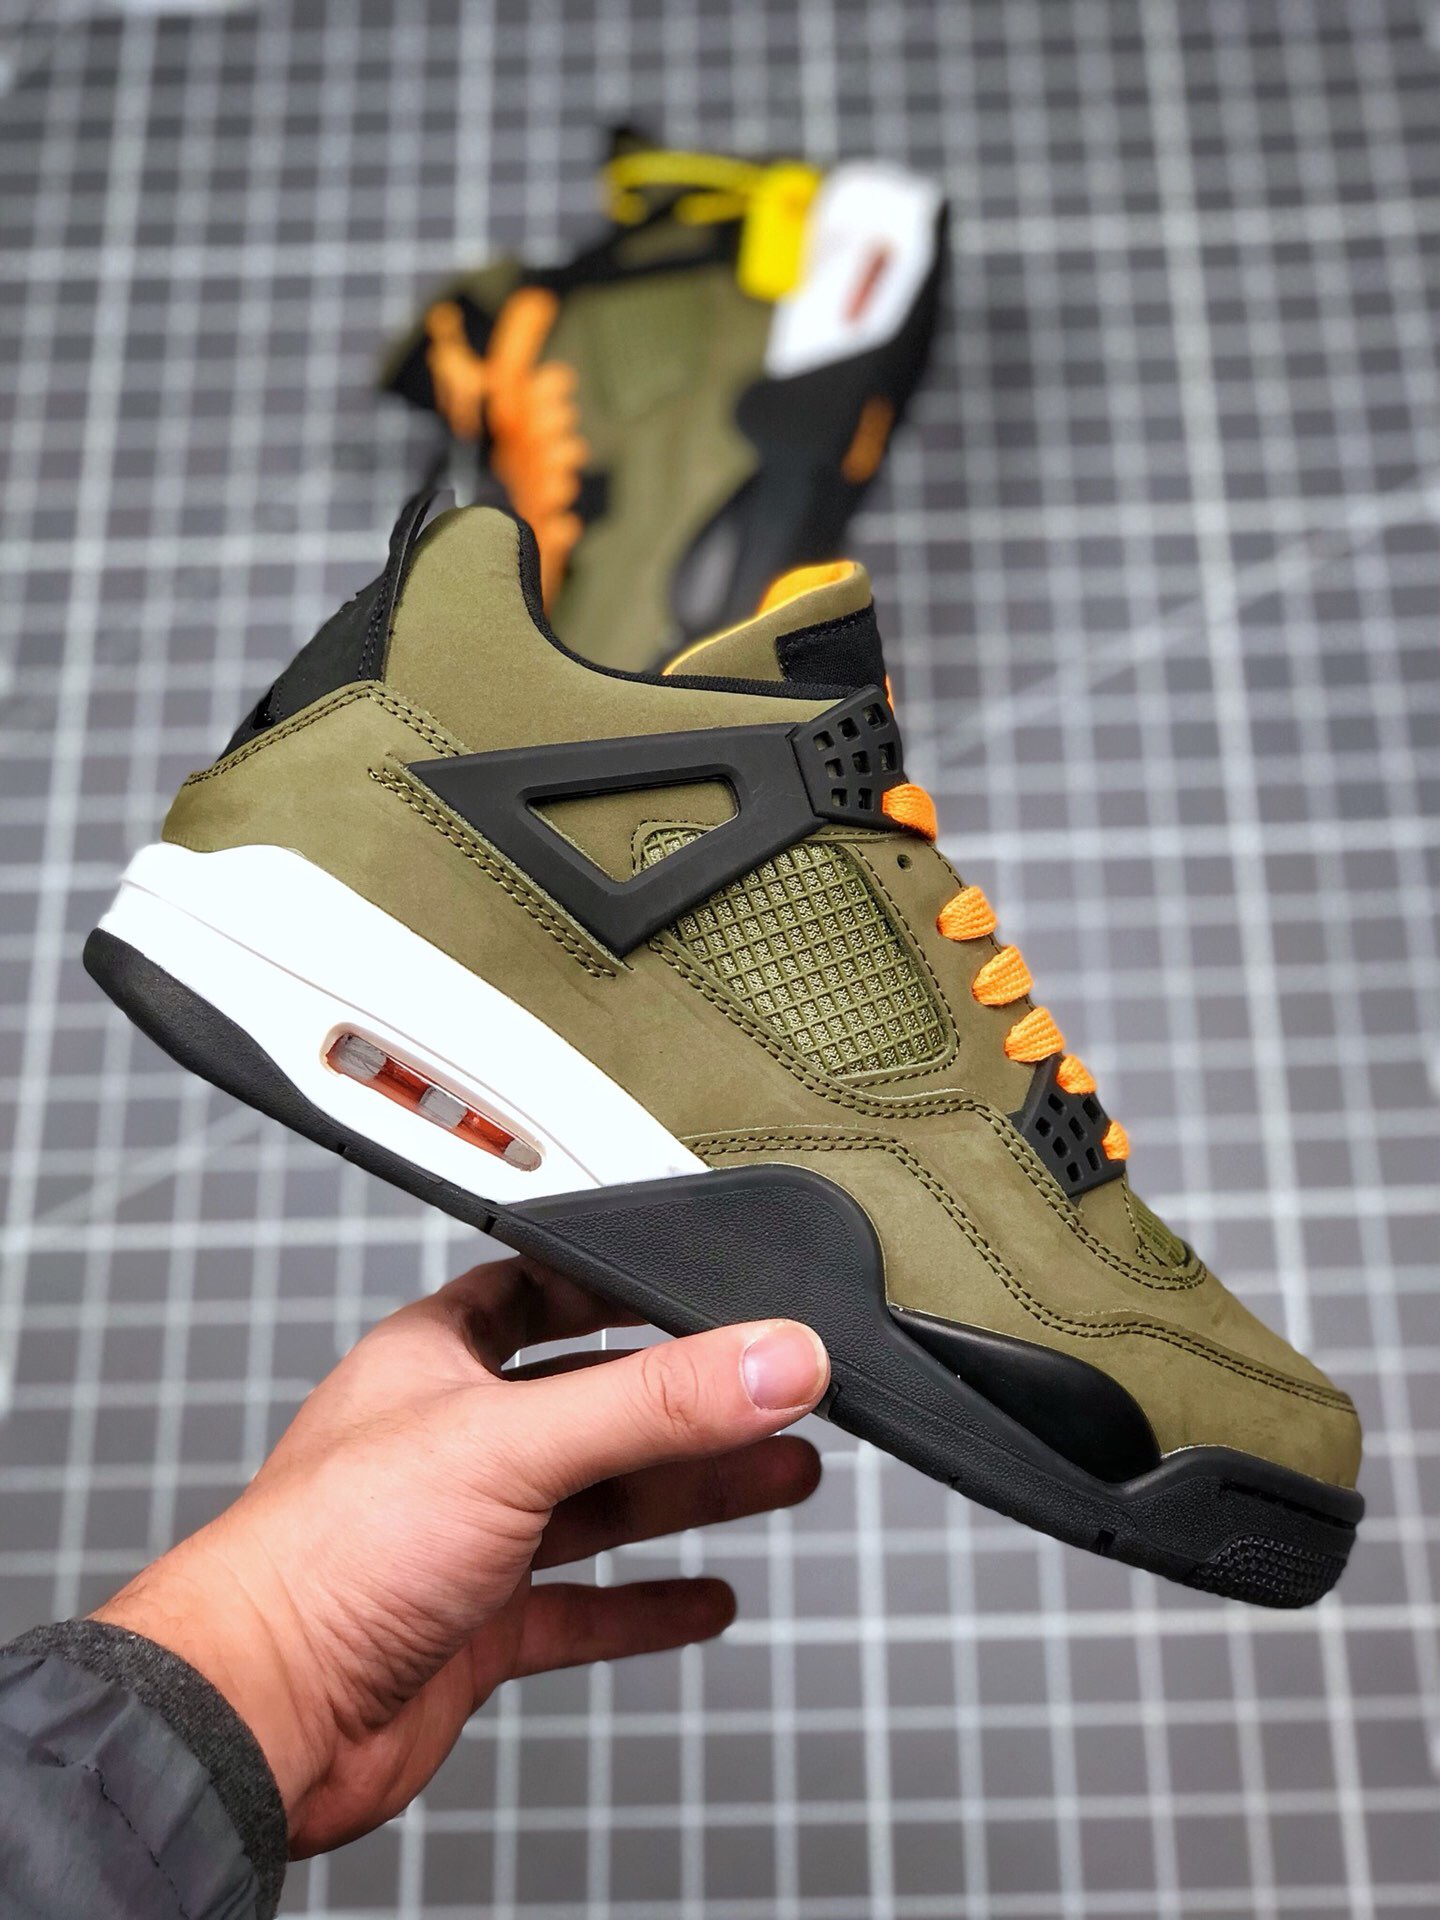 Air Jordan 4 Retro “undefeated” Olive Oiled Suede Flight Satin For Sale